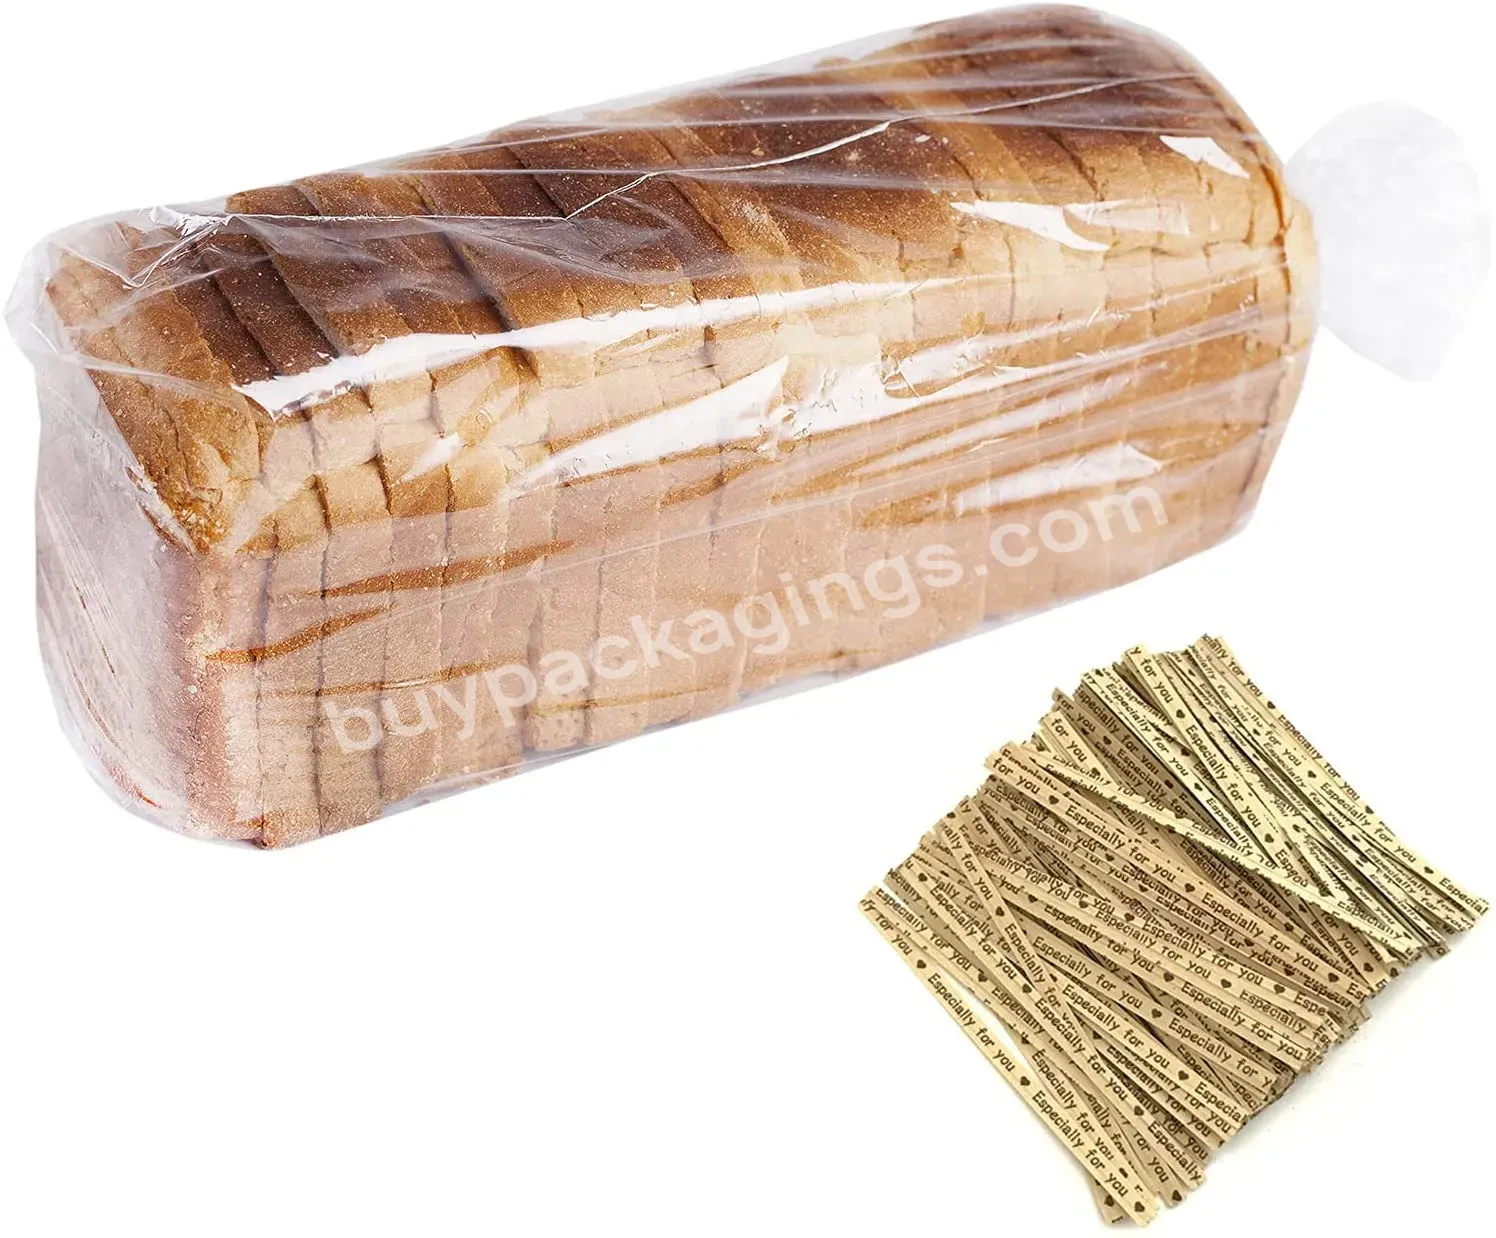 100pieces 18x4x8 Inches Reusable Plastic Bread Bags Bread Loaf Bags For Home Bakers And Bakery Owners - Buy Bread Loaf Bags,Reusable Plastic Bread Bags,Bread Bags.